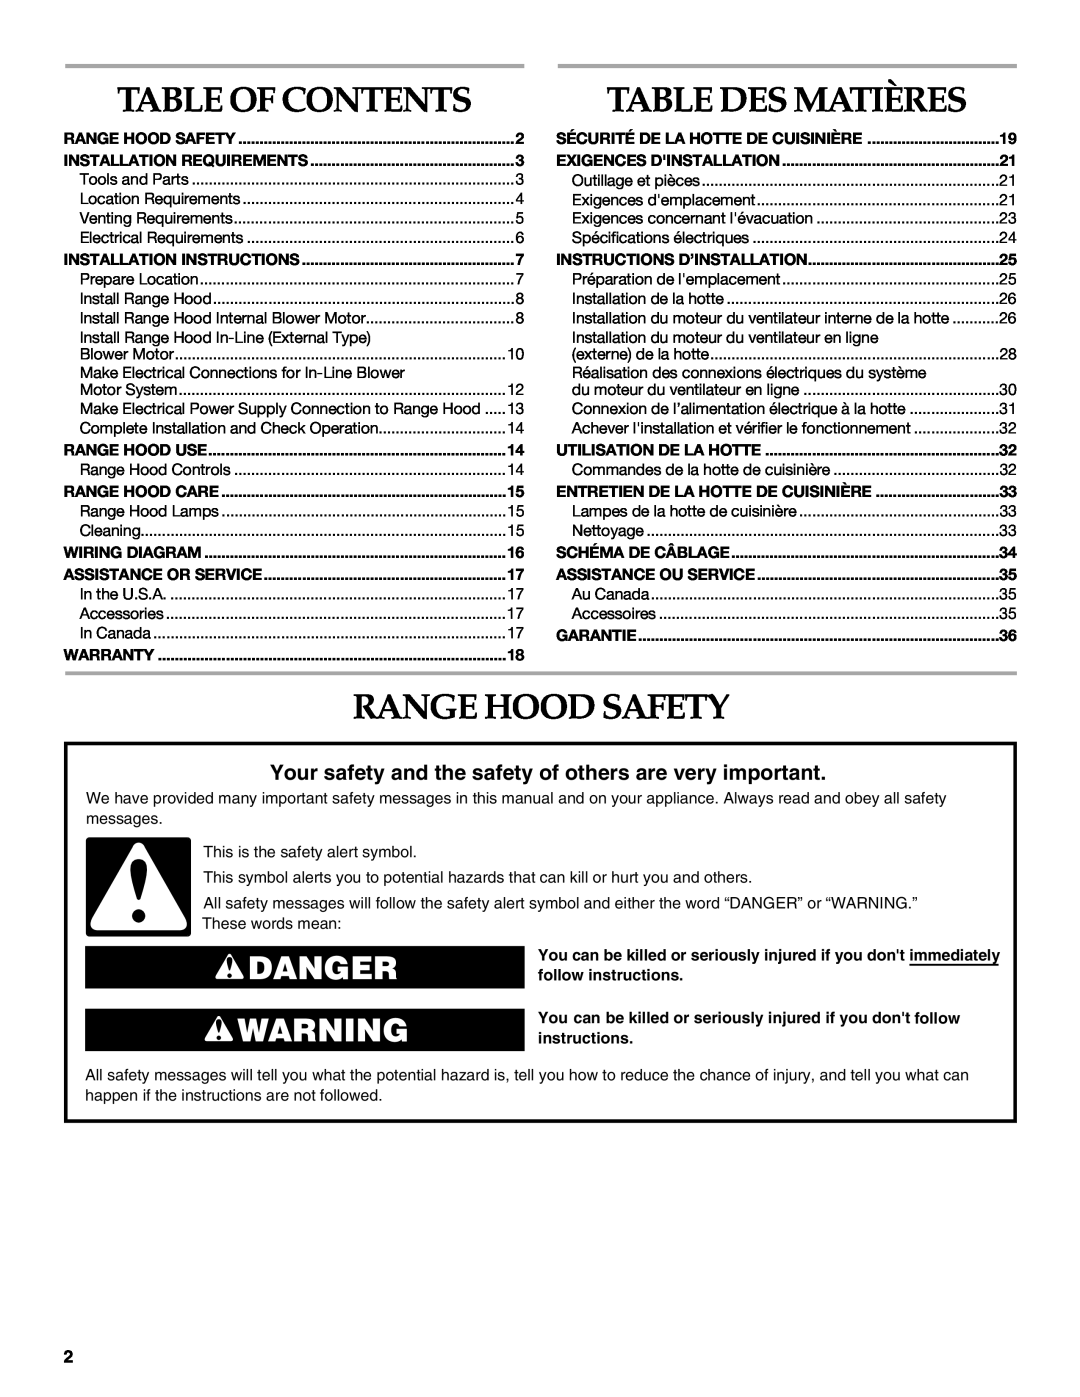 KitchenAid W10331007B Table Of Contents, Range Hood Safety, Danger, Table Des Matières, Installation Requirements 